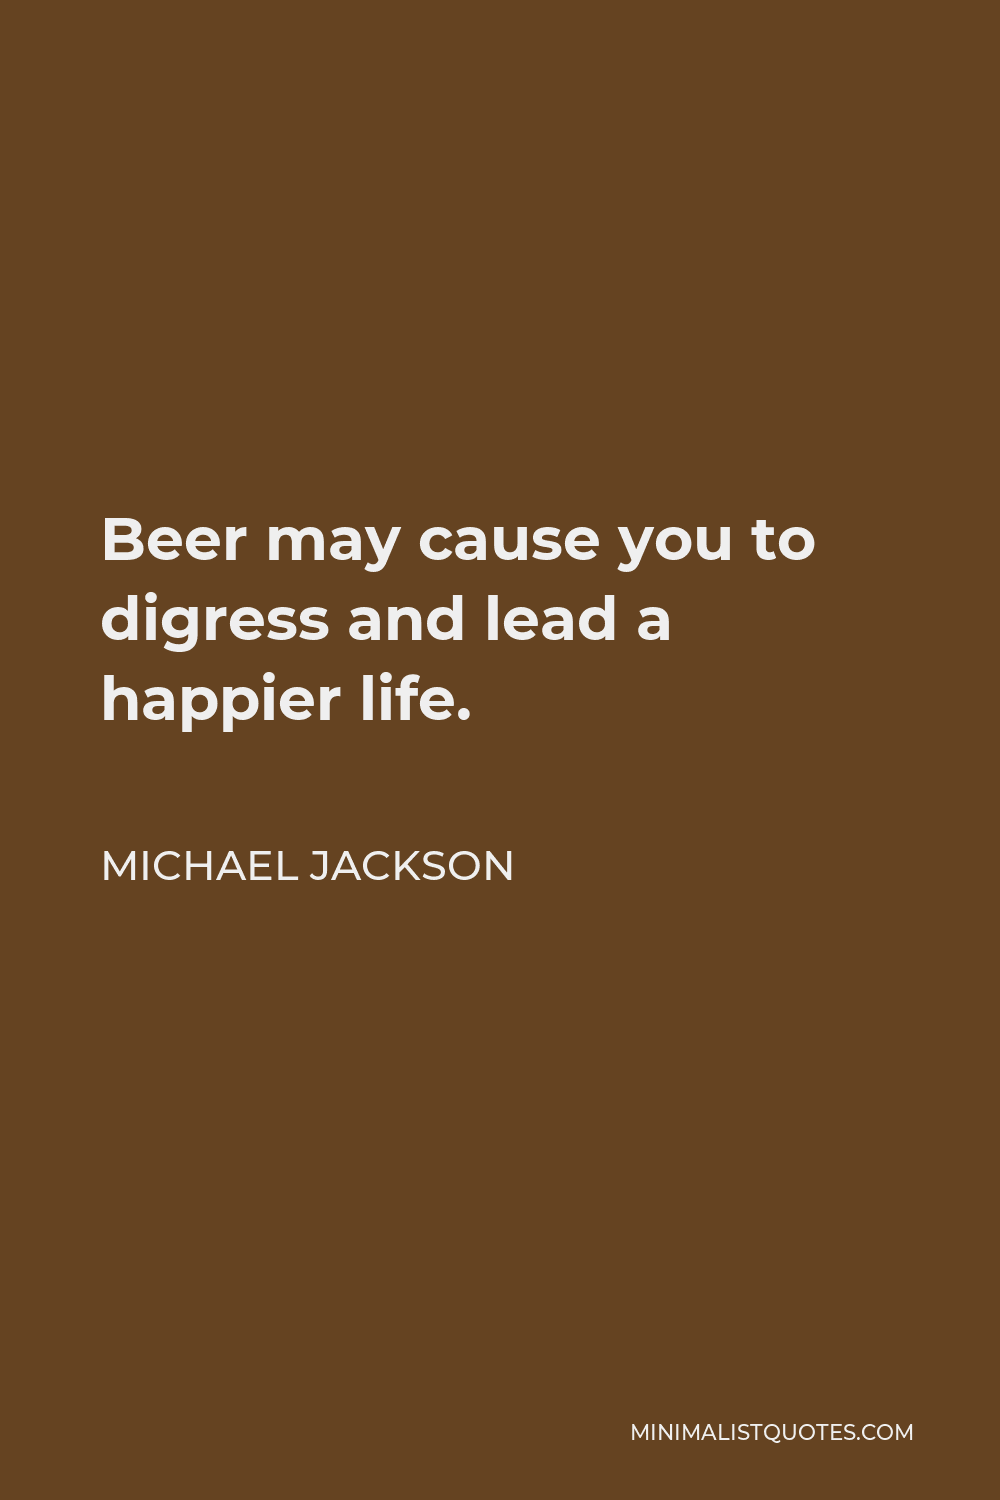 Michael Jackson Quote - Beer may cause you to digress and lead a happier life.